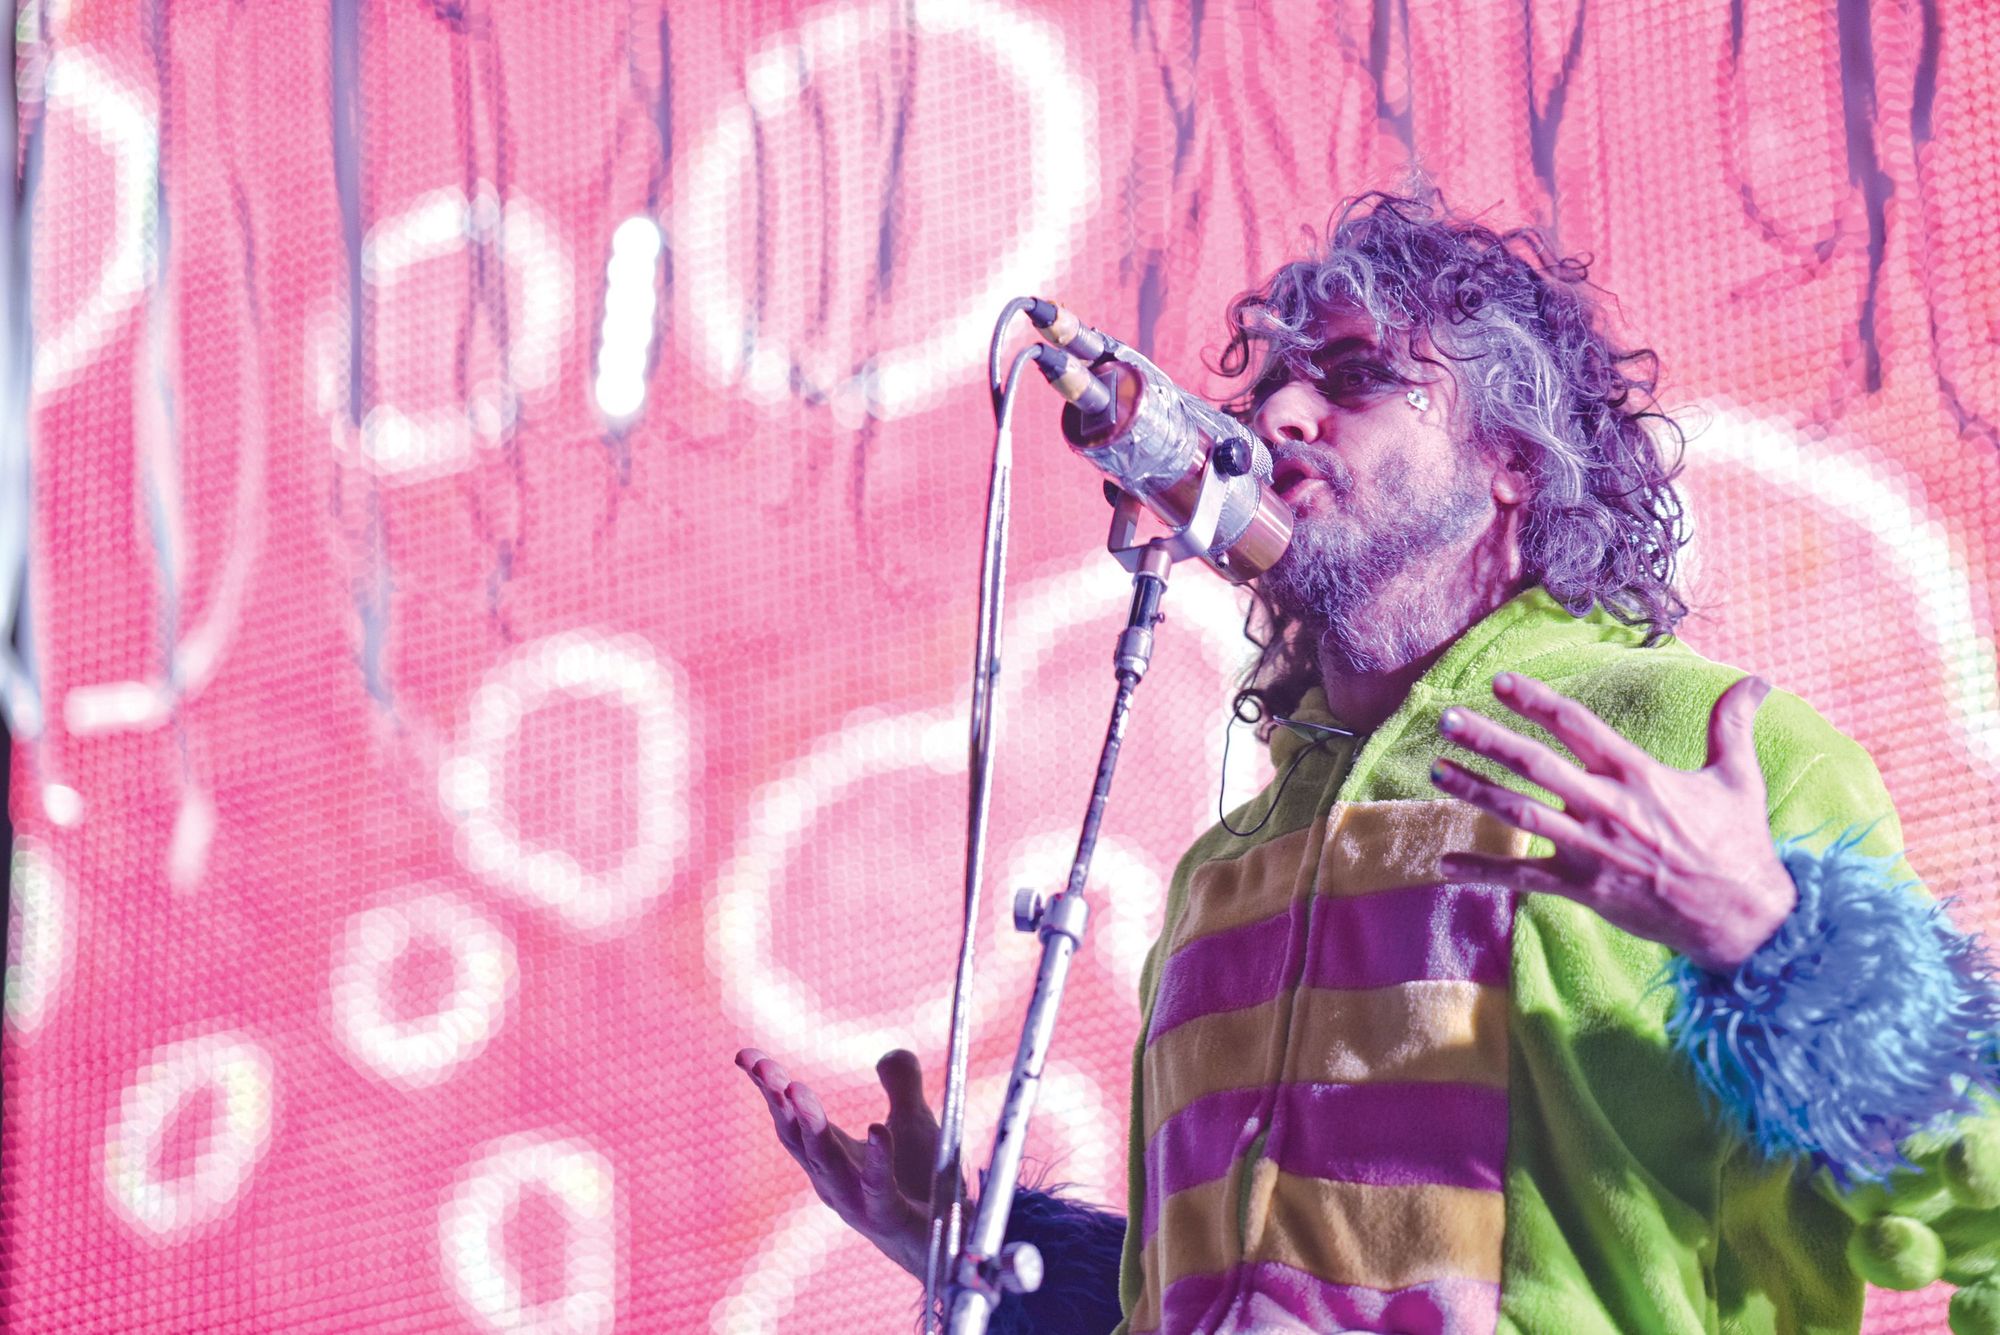 The Flaming Lips live in front of pink LED wall.